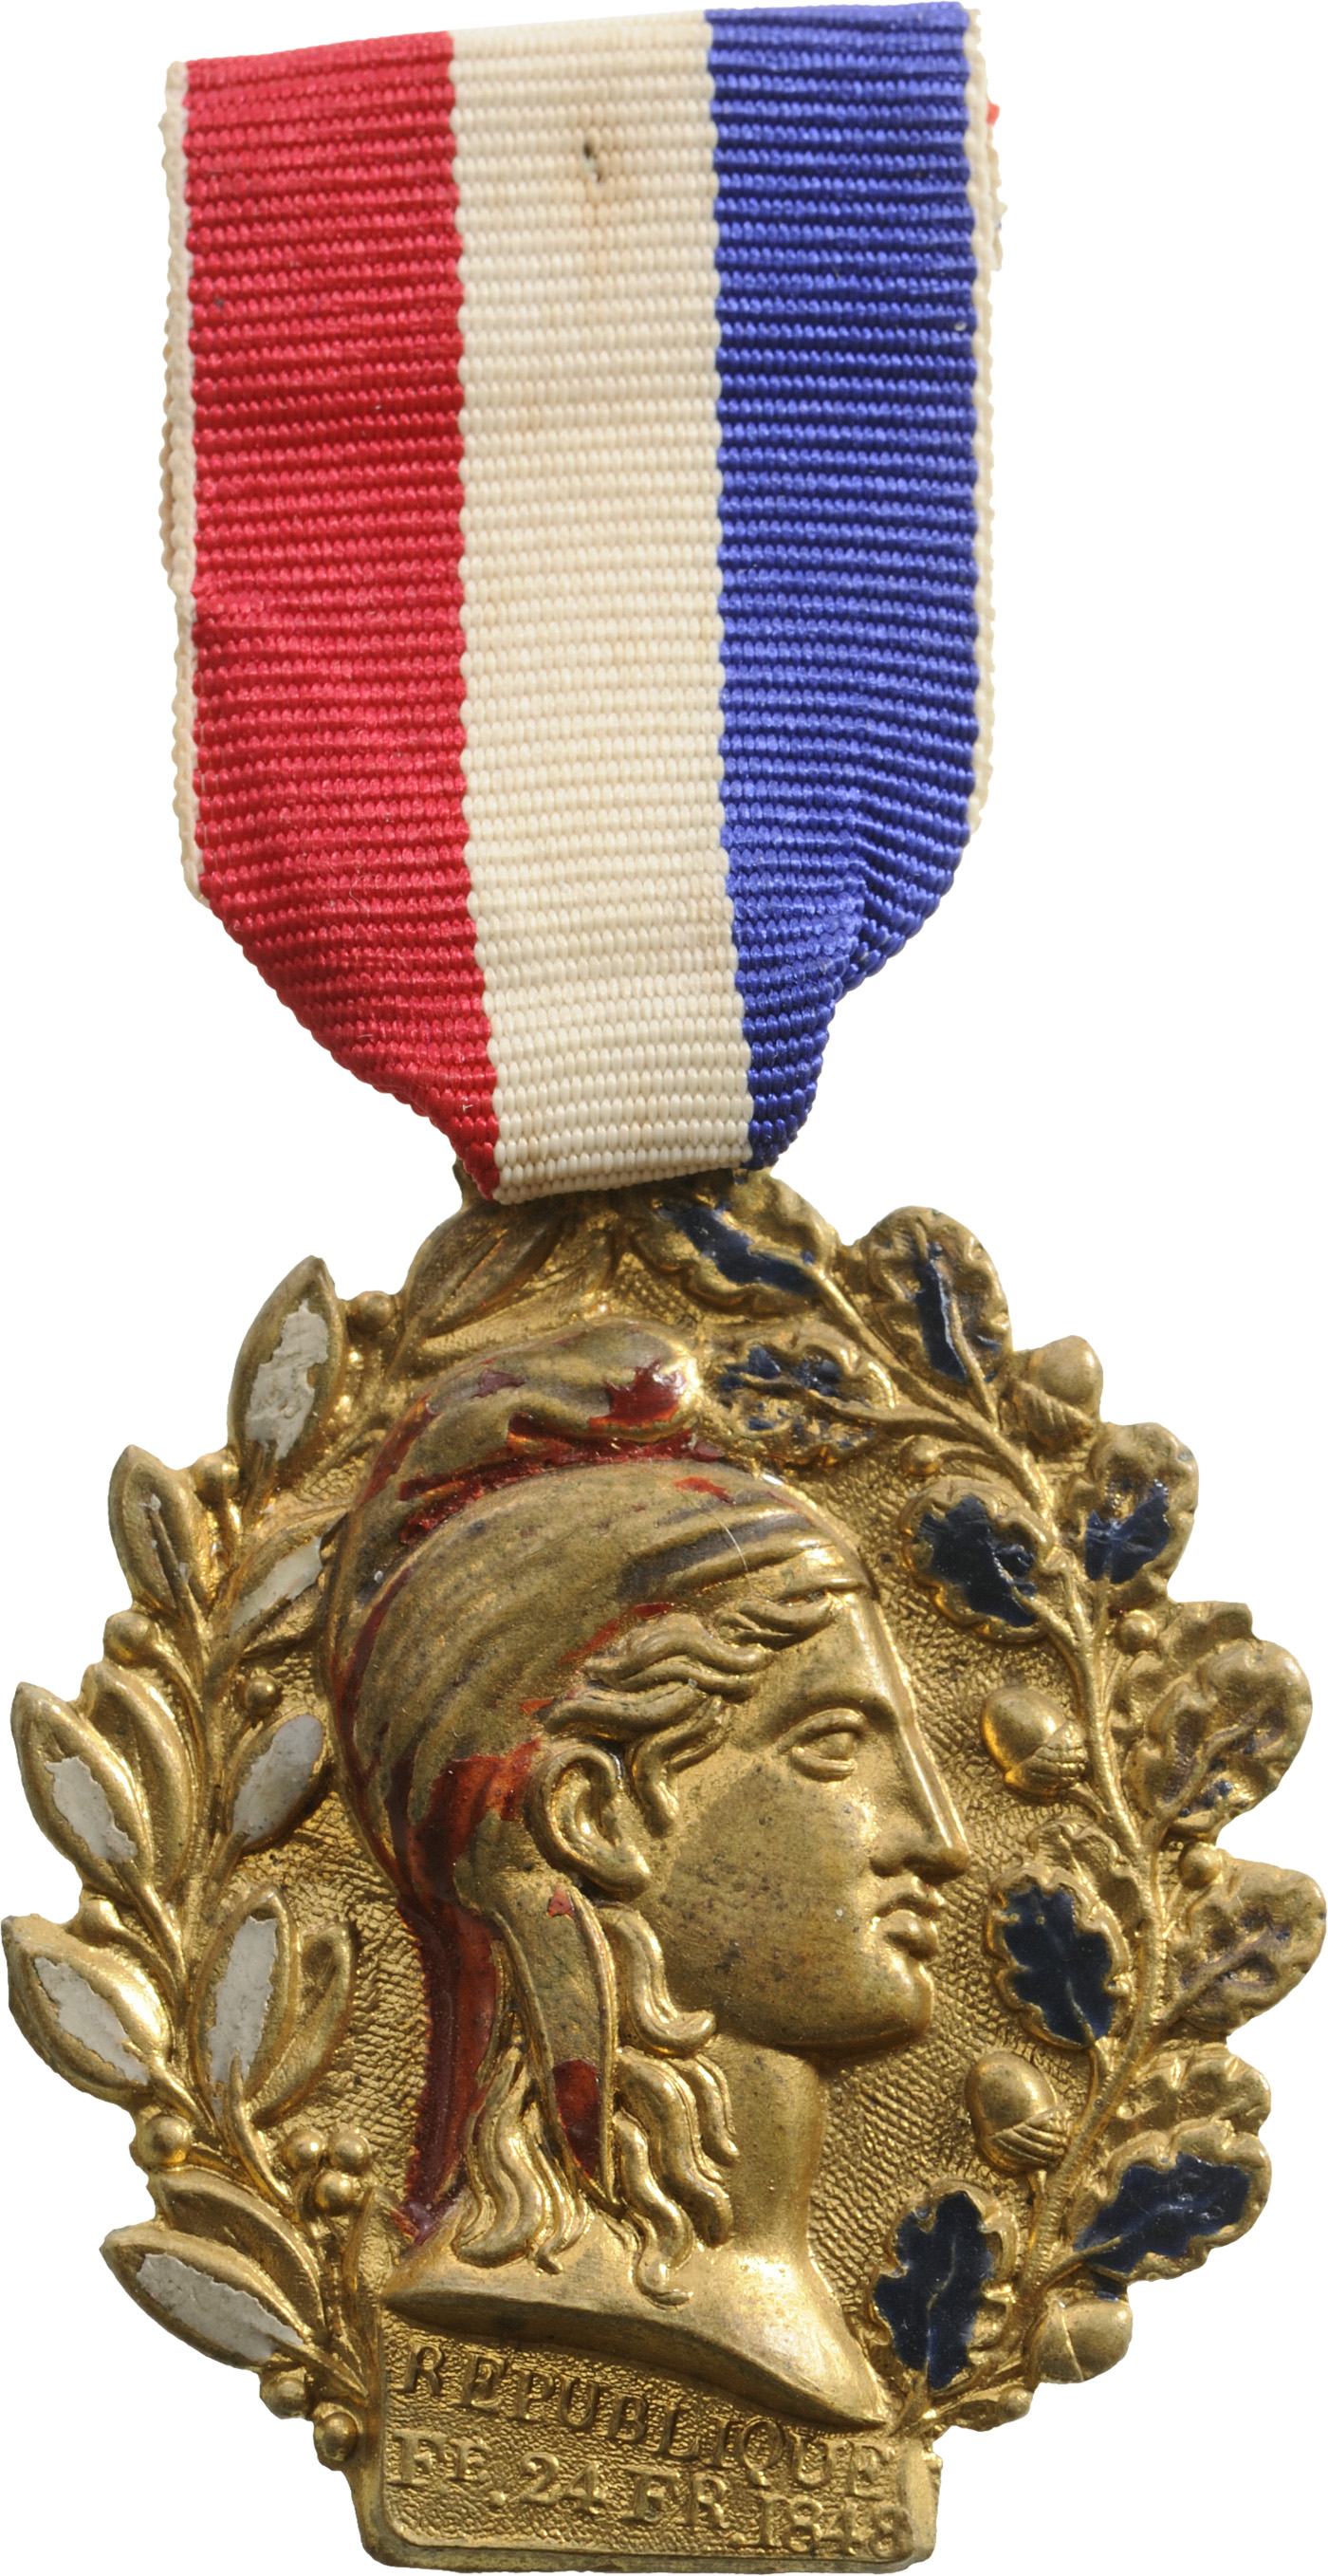 Medal of the "Revolution of 1848", 2nd Republic